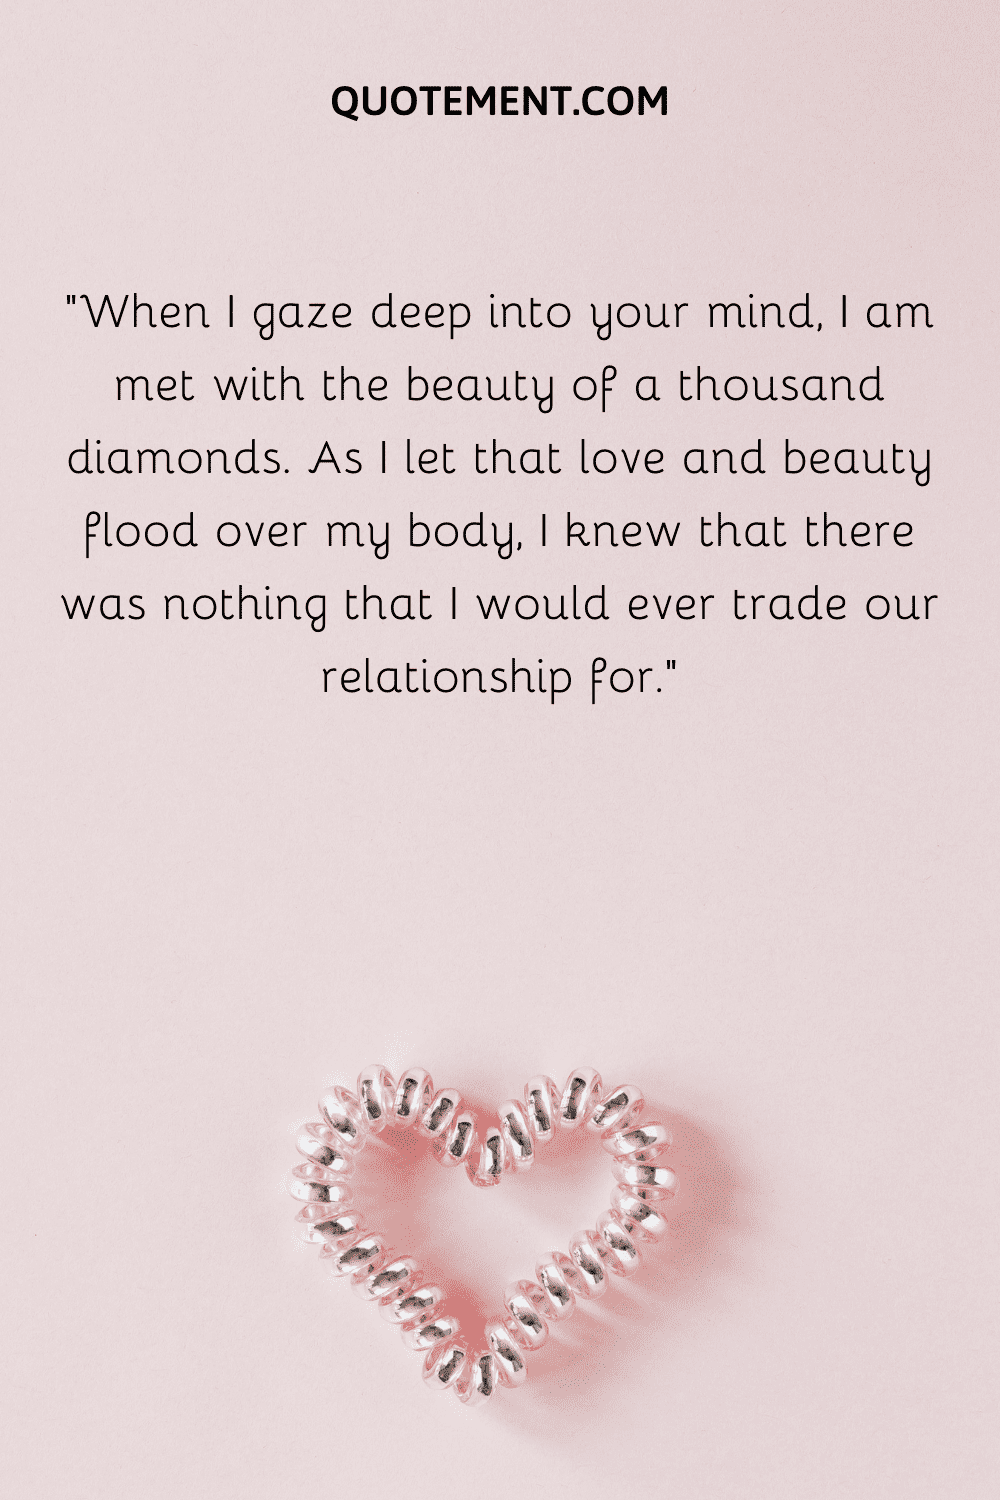 When I gaze deep into your mind, I am met with the beauty of a thousand diamonds.